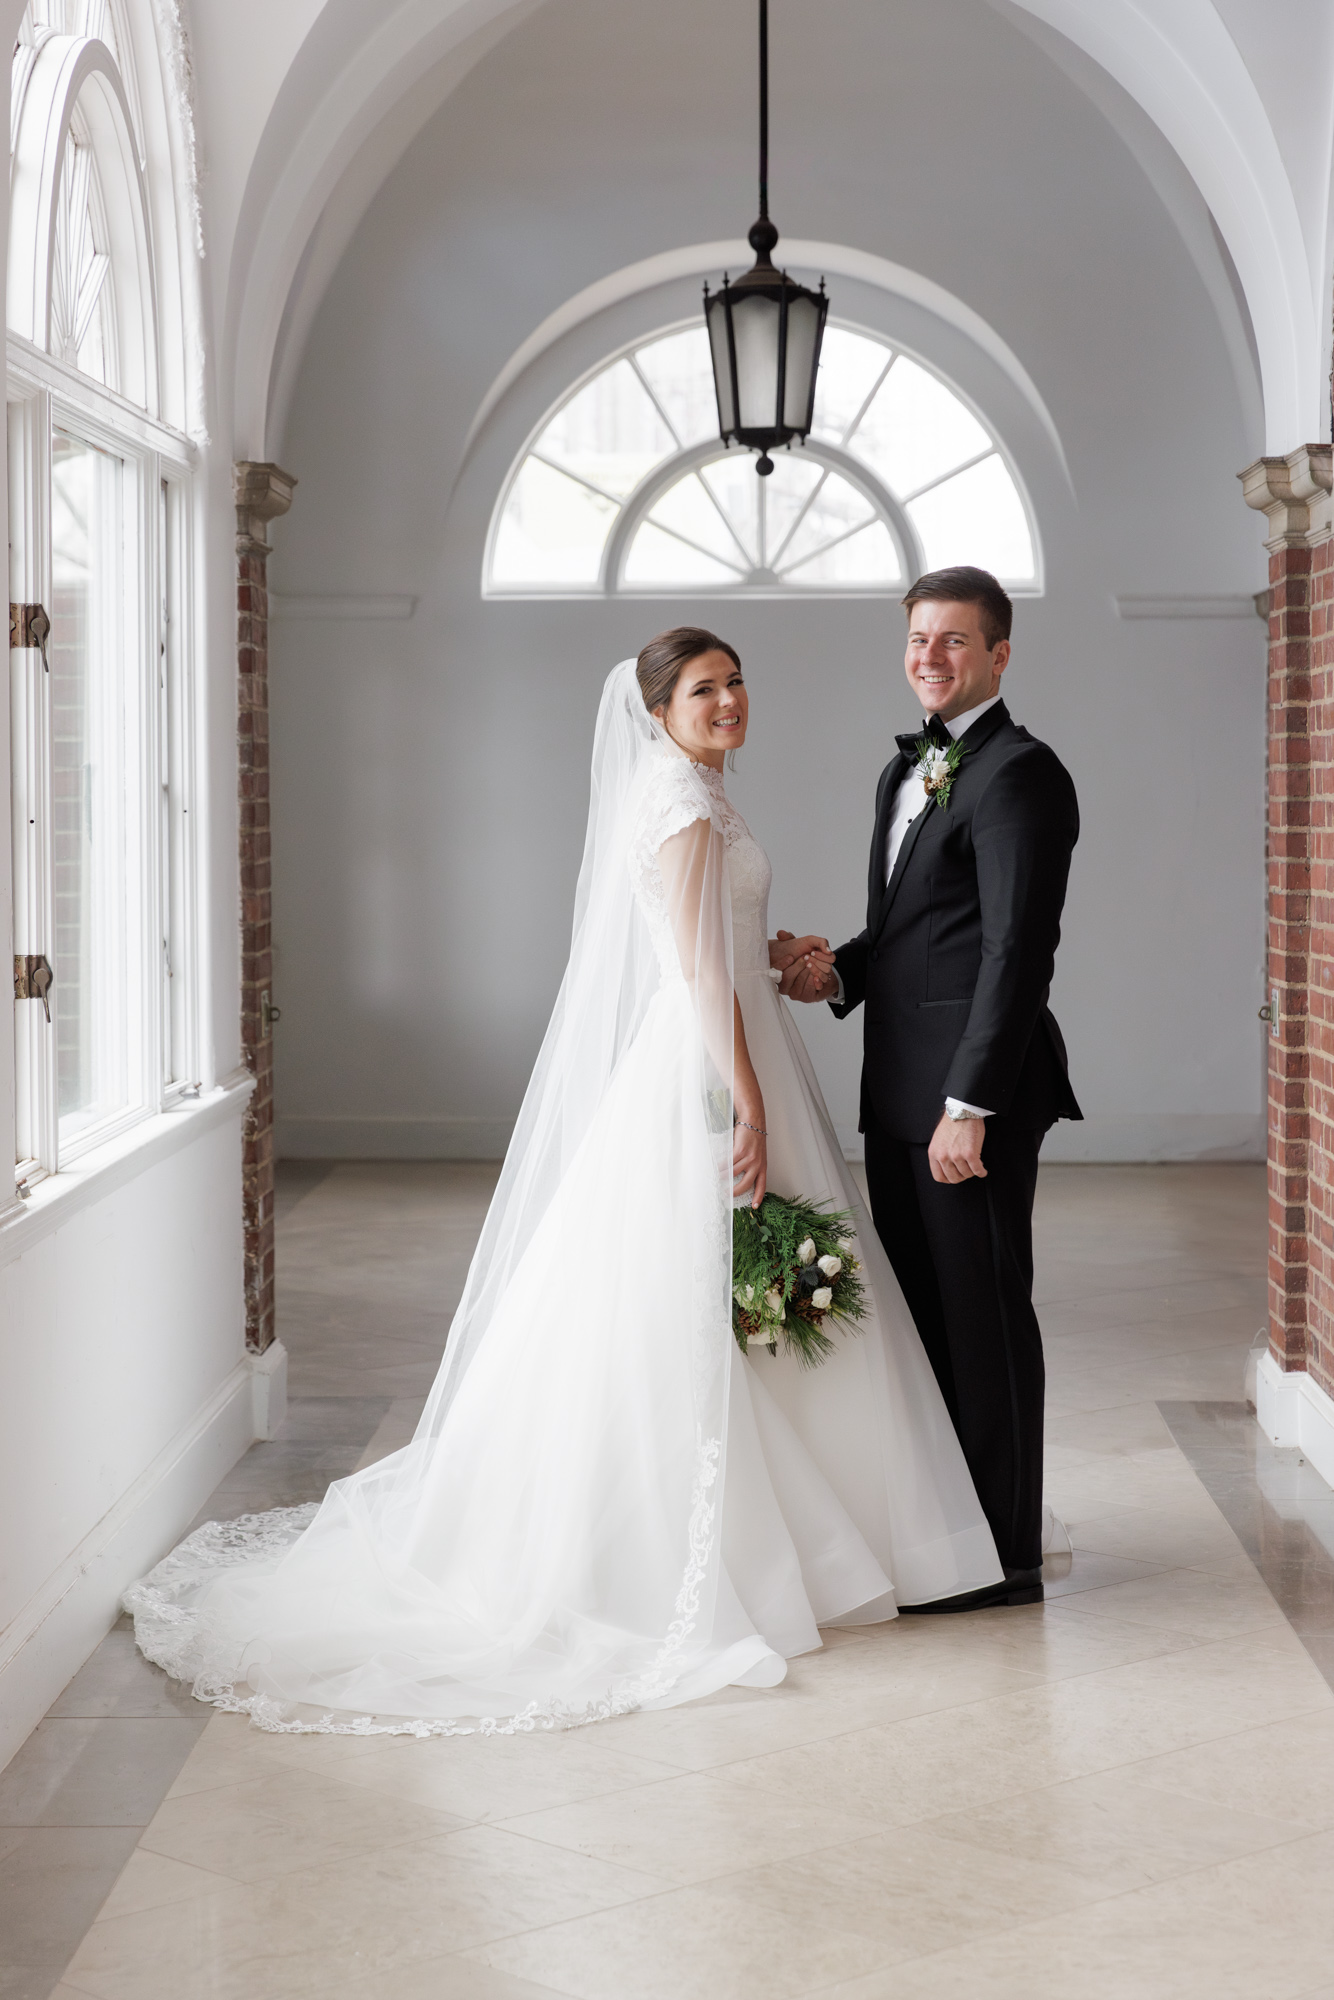 An elegant bride in a long white gown and holding a bouquet at her side holds the hand of a groom in black tie attire in an arched white hallway at the Mansion at Natirar in Peapack and Gladstone NJ